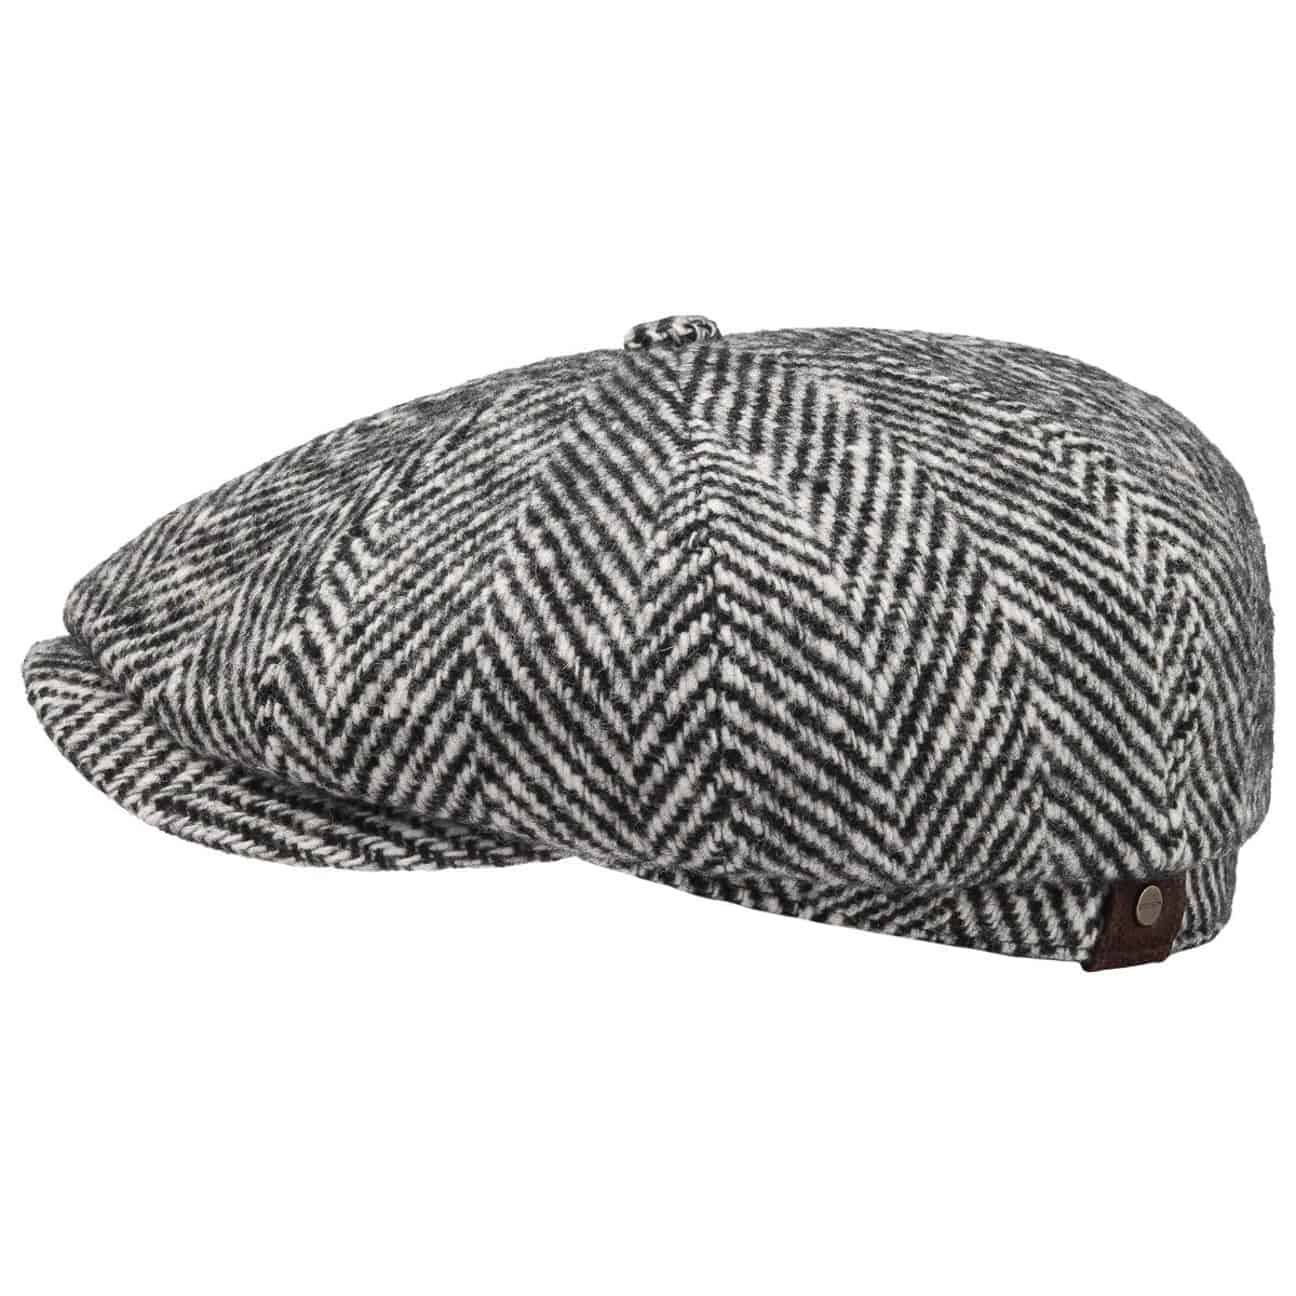 Hatteras Flat Cap with Earflaps by Stetson - 99,00